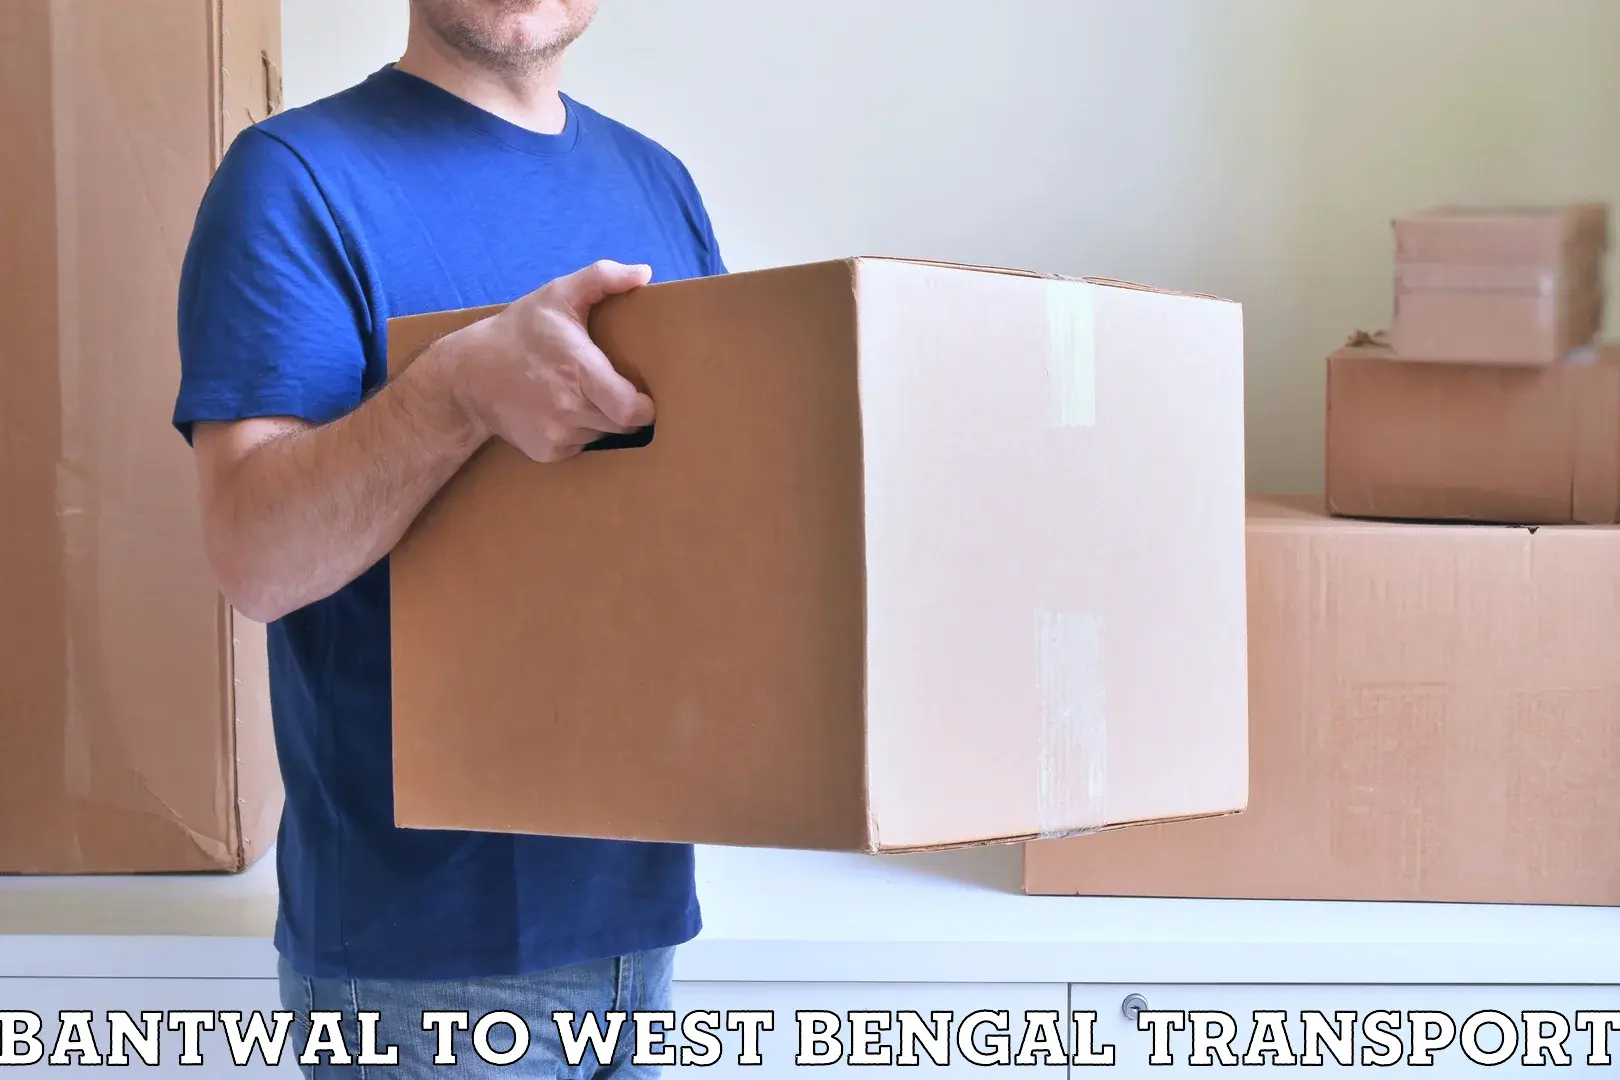 Lorry transport service Bantwal to West Bengal